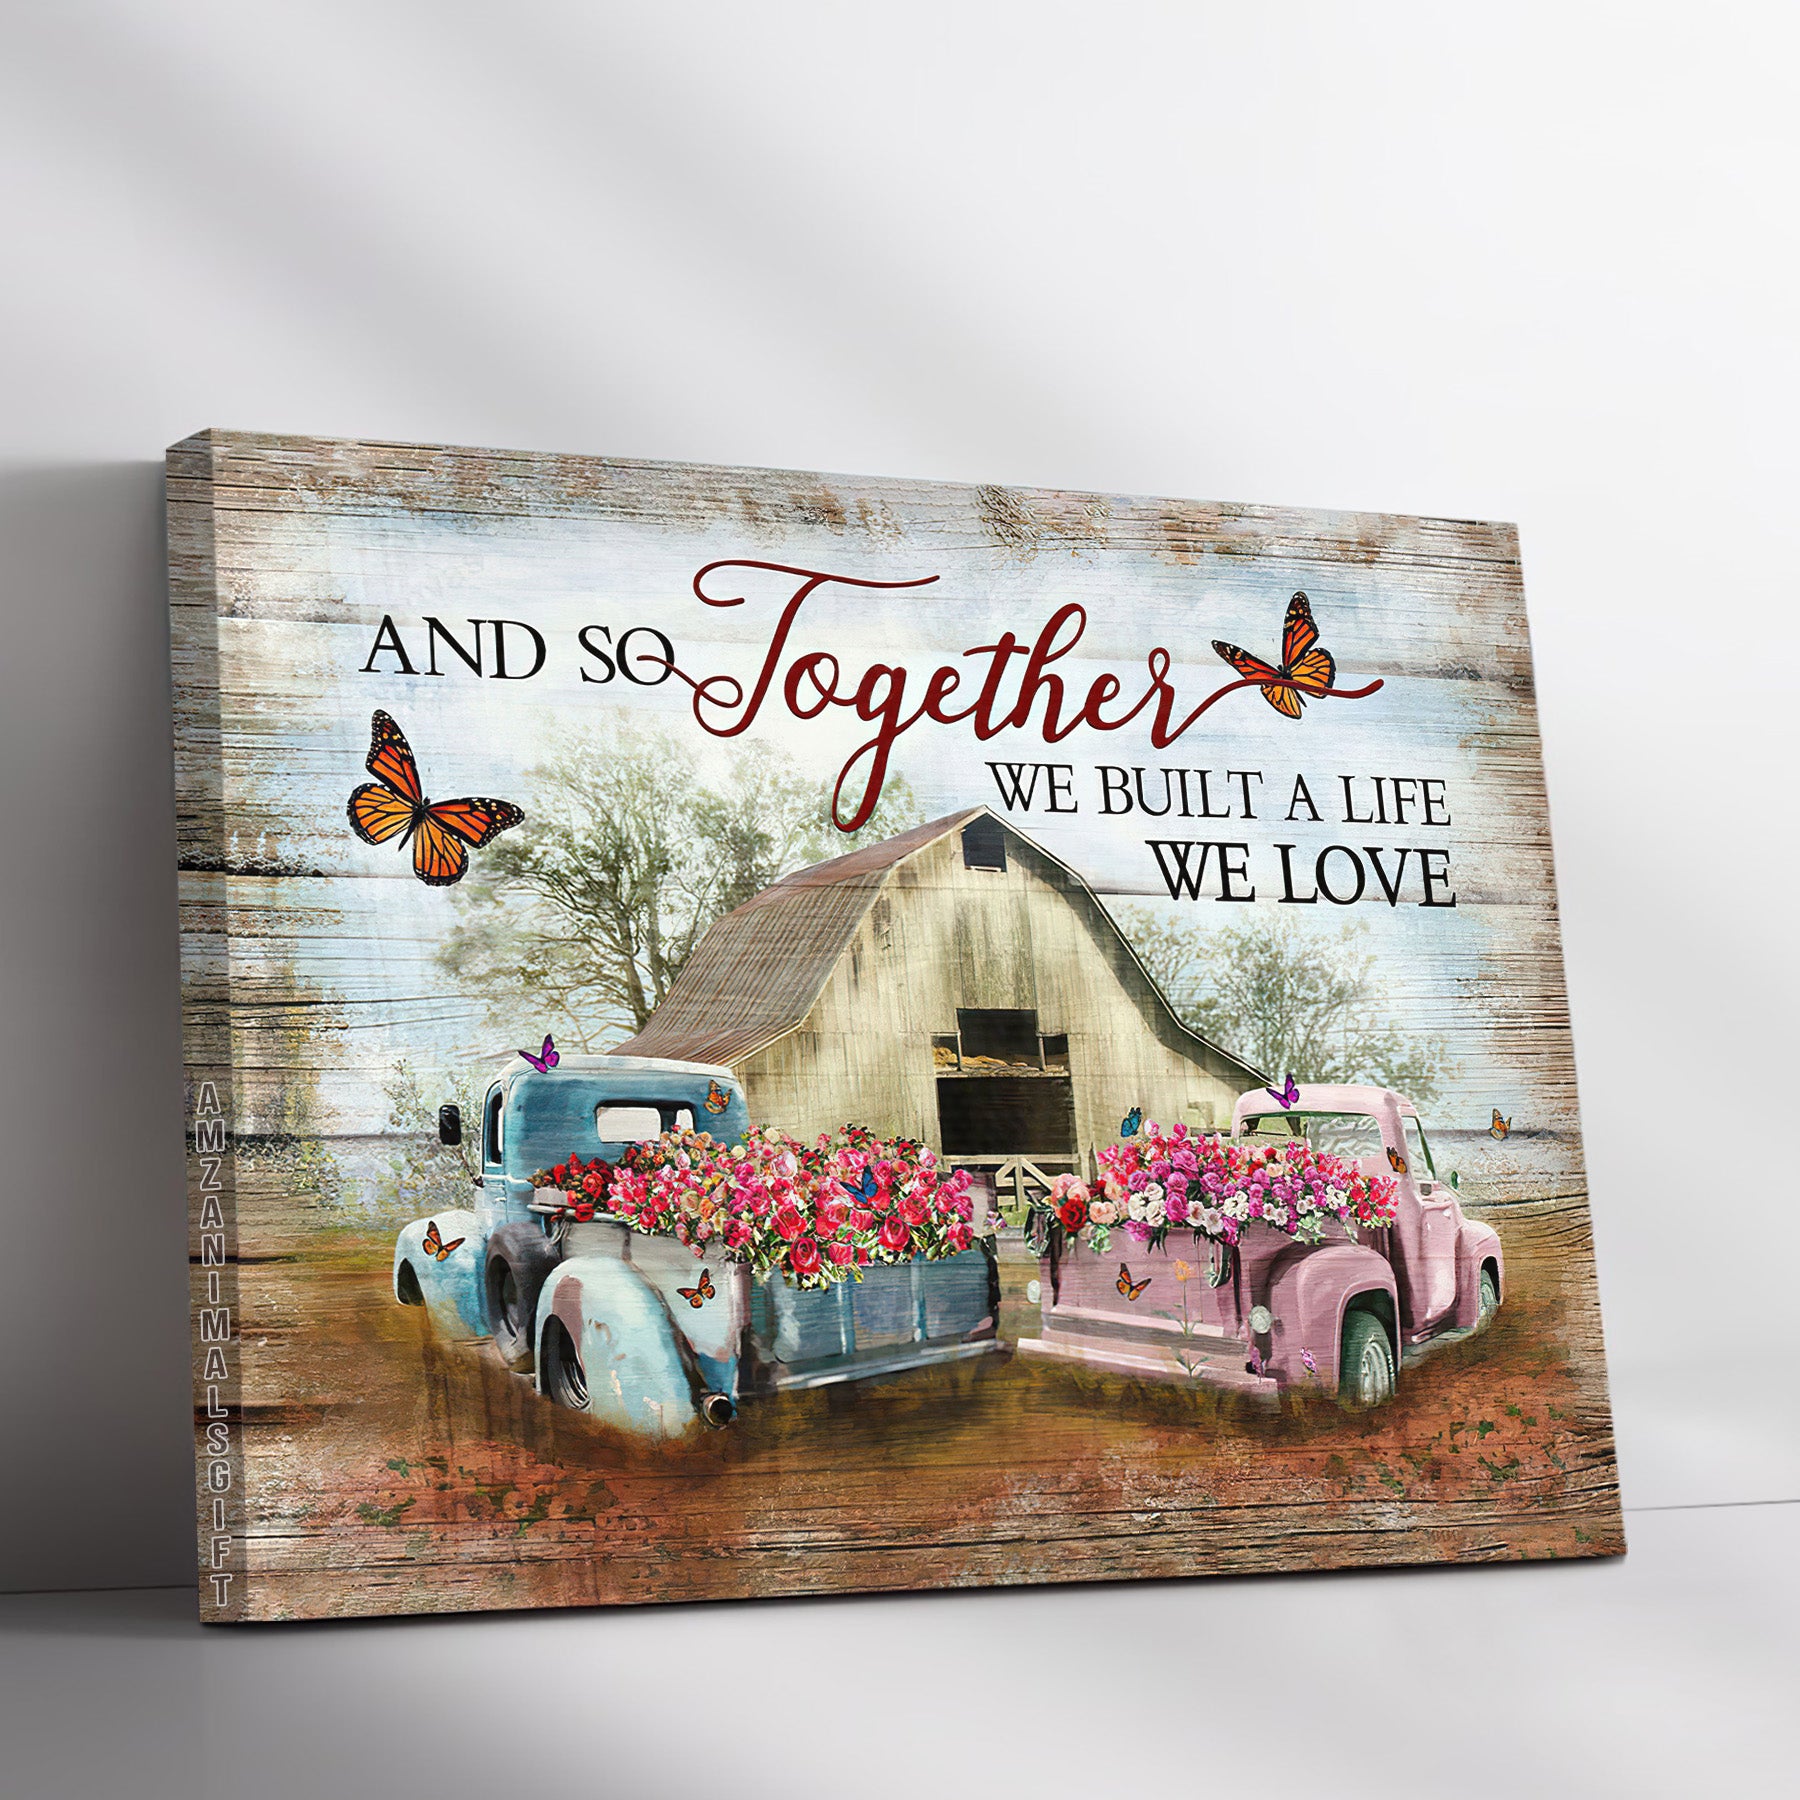 Farm & Jesus Premium Wrapped Landscape Canvas - Old Barn Painting, Flower Car, Butterfly, And so together We built a life we love - Gift For Christian